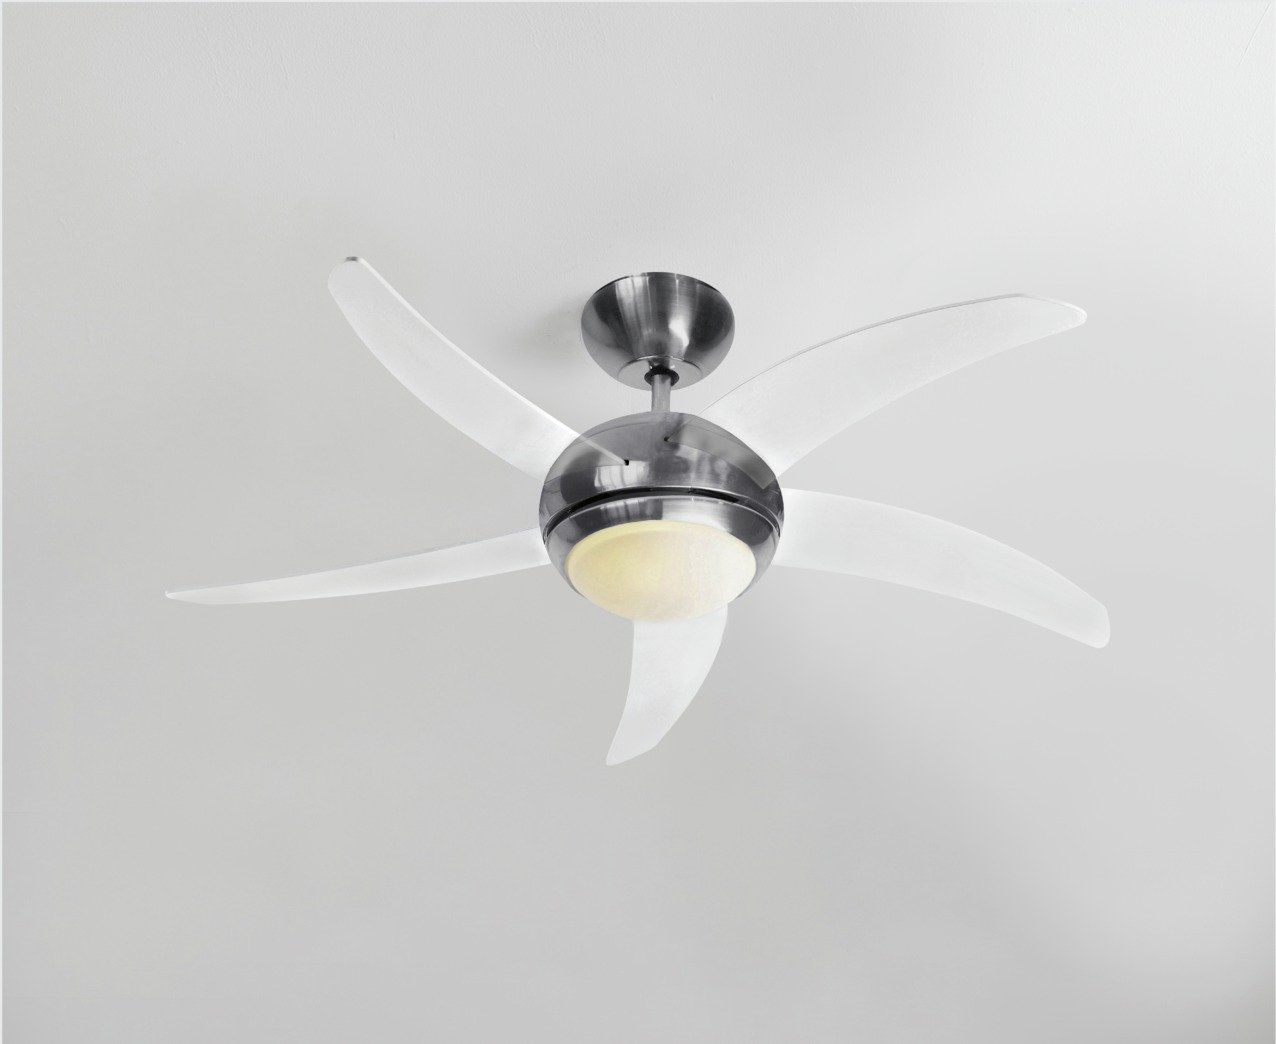 Details About Home Manhattan Ceiling Fan Satin Nickel Cool Whilst Making Minimal Noise New